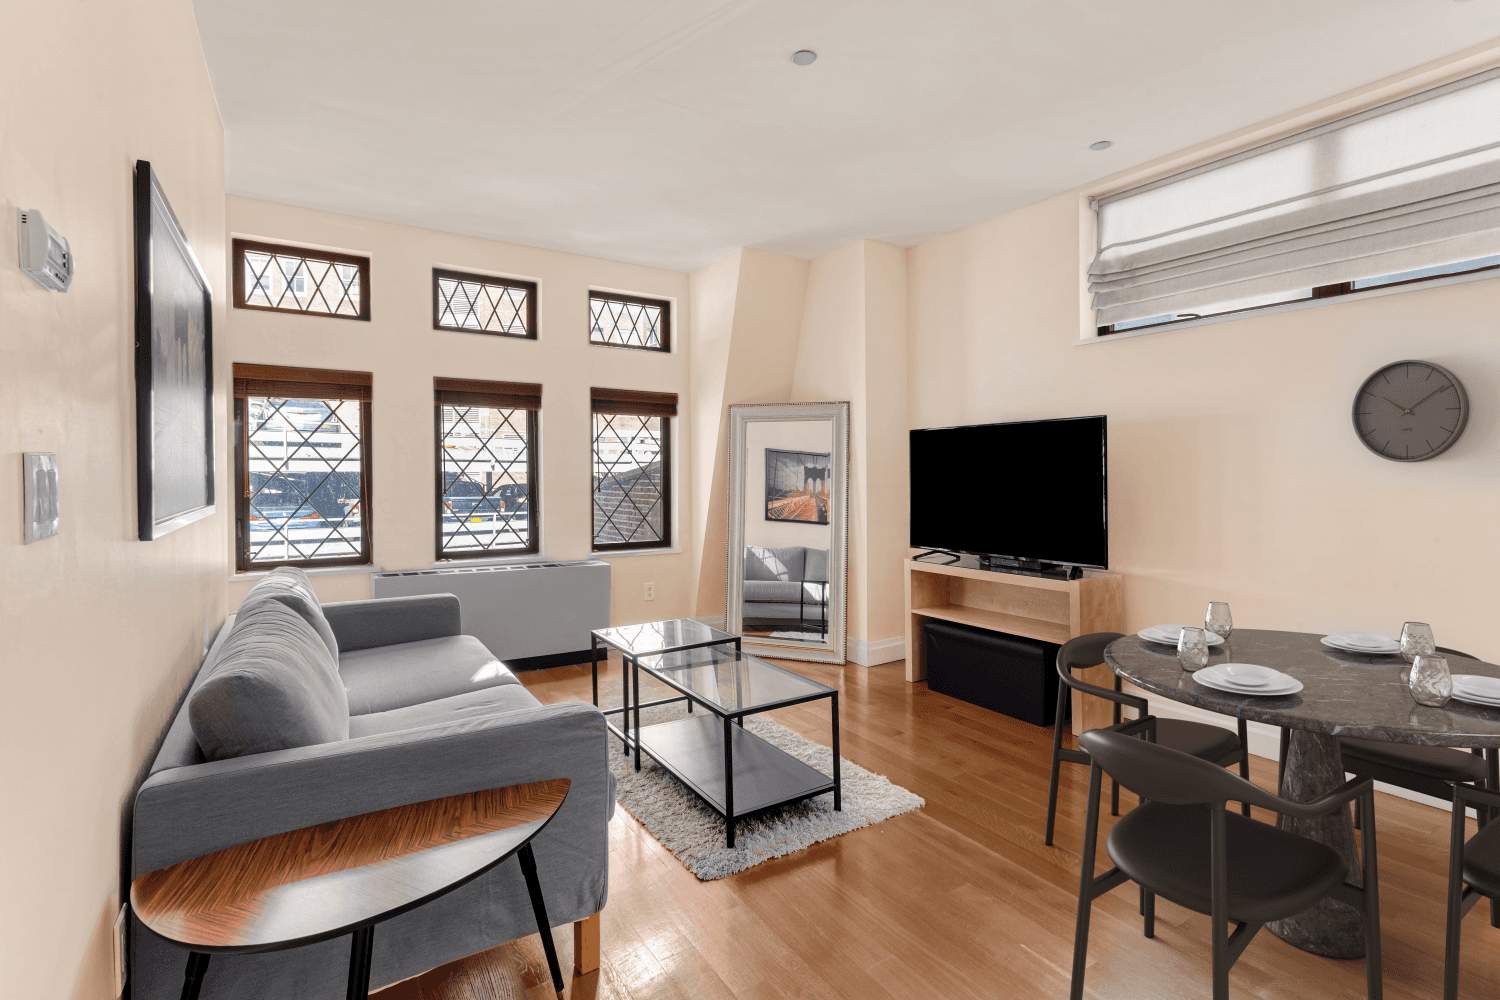 Available for short and long termFor the true New Yorker, 5A offers the charm and allure of being a part of history while enjoying the spectacular finishes of a recently ...